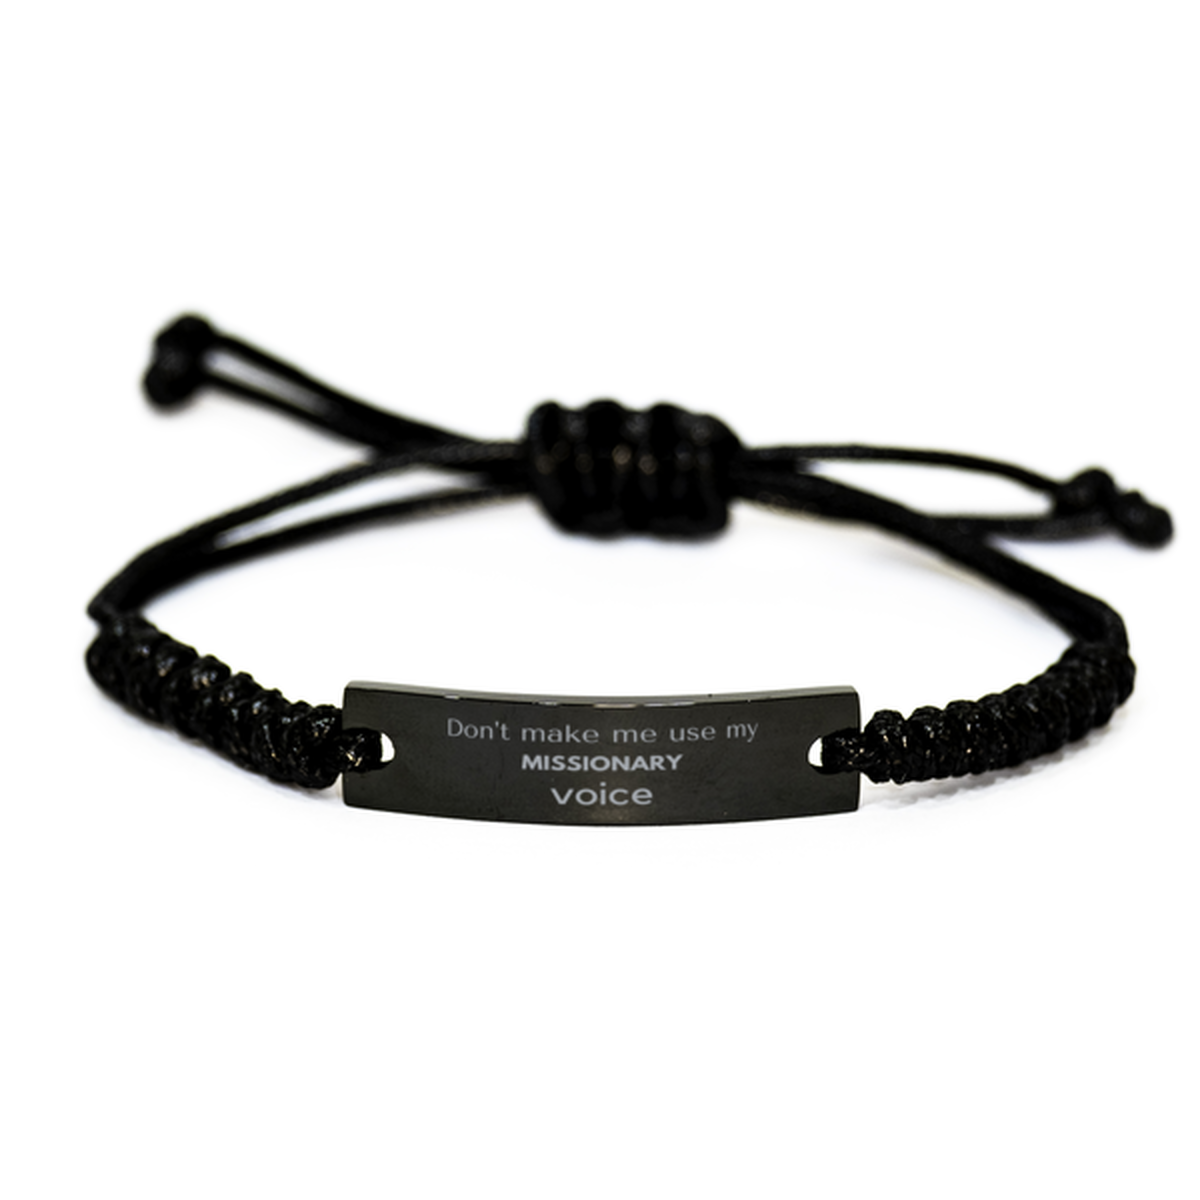 Don't make me use my Missionary voice, Sarcasm Missionary Gifts, Christmas Missionary Black Rope Bracelet Birthday Unique Gifts For Missionary Coworkers, Men, Women, Colleague, Friends